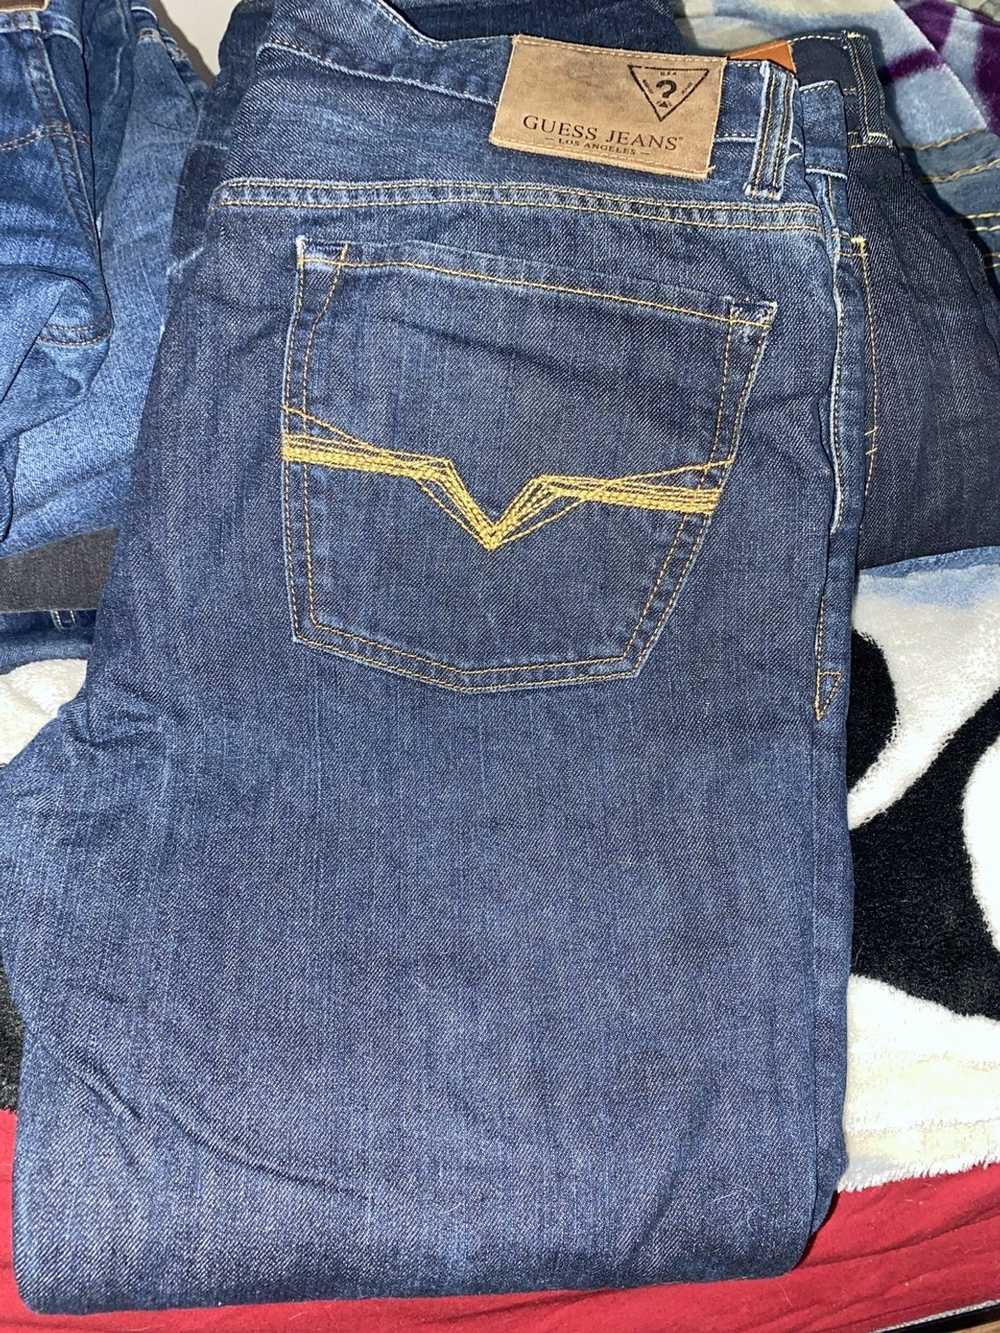 Guess Guess jeans - image 2